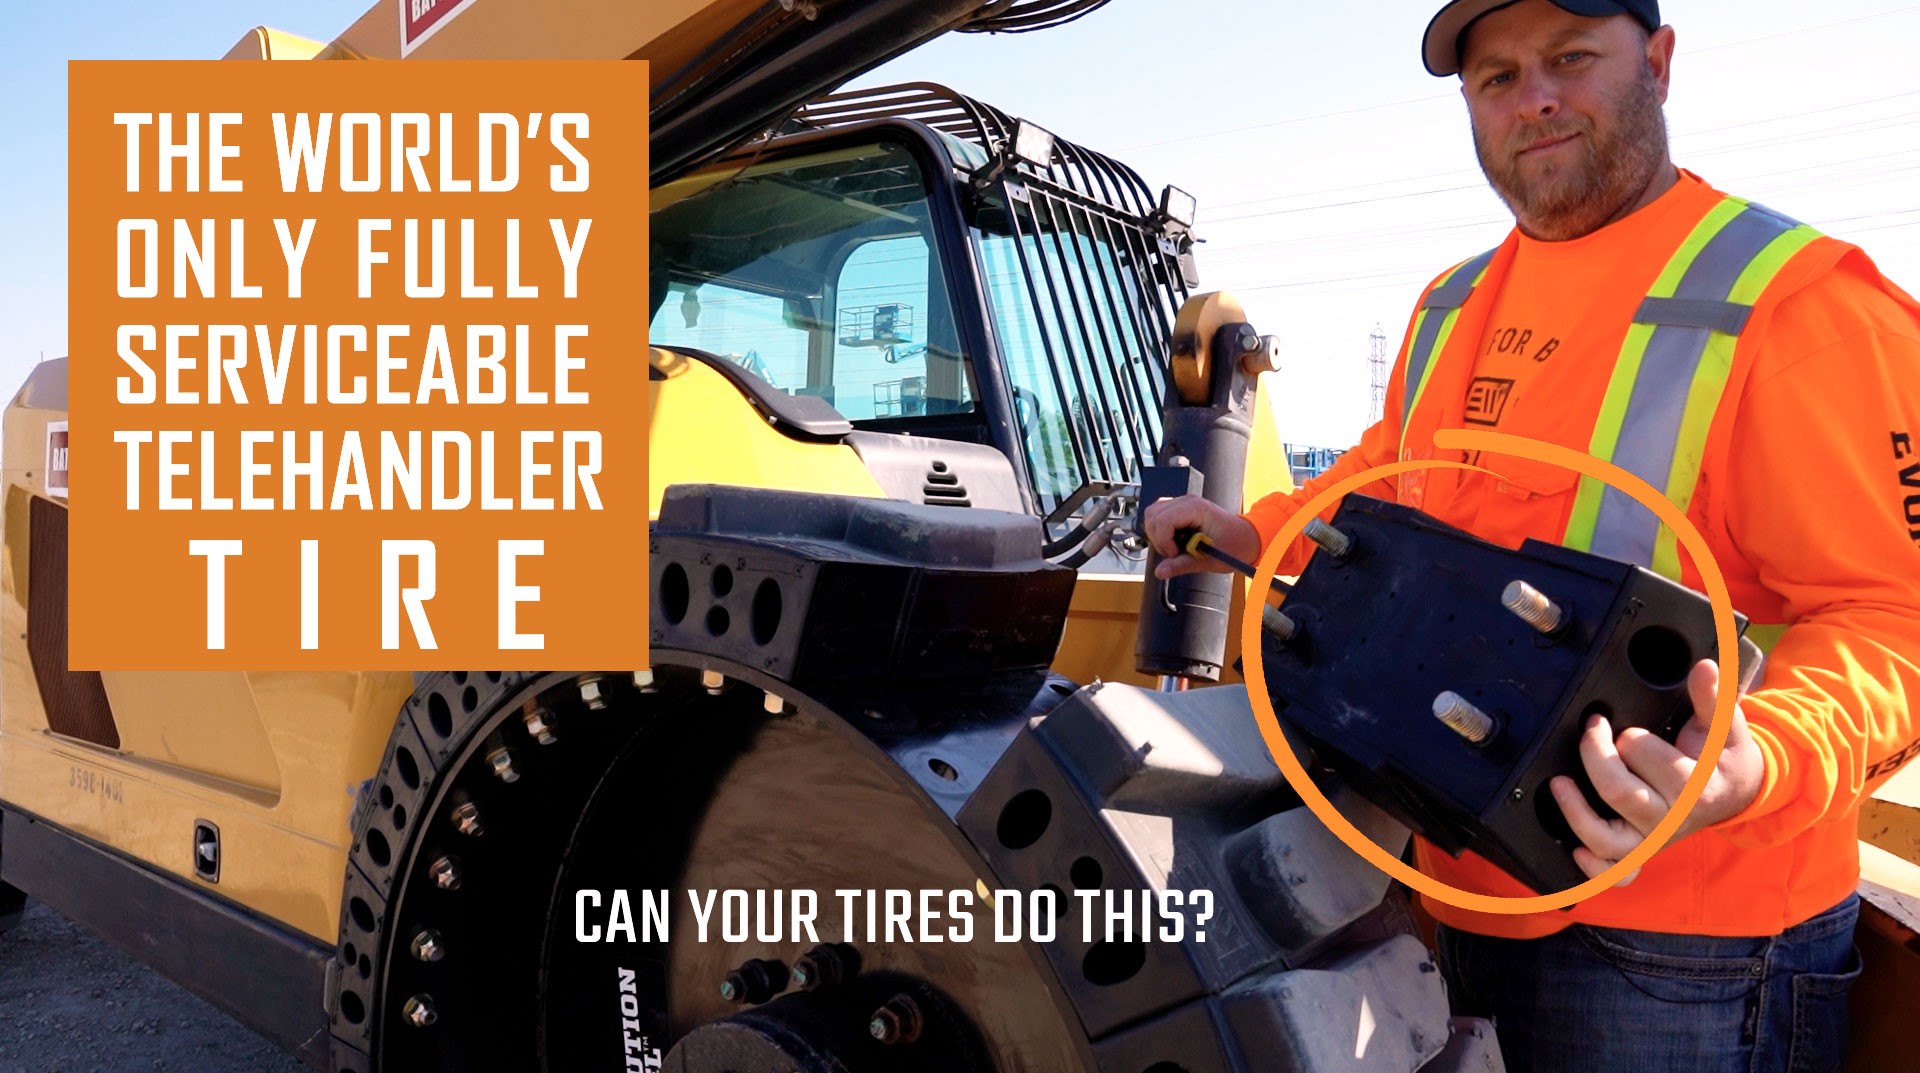 This video is about the world's only fully serviceable JLG telehandler tires